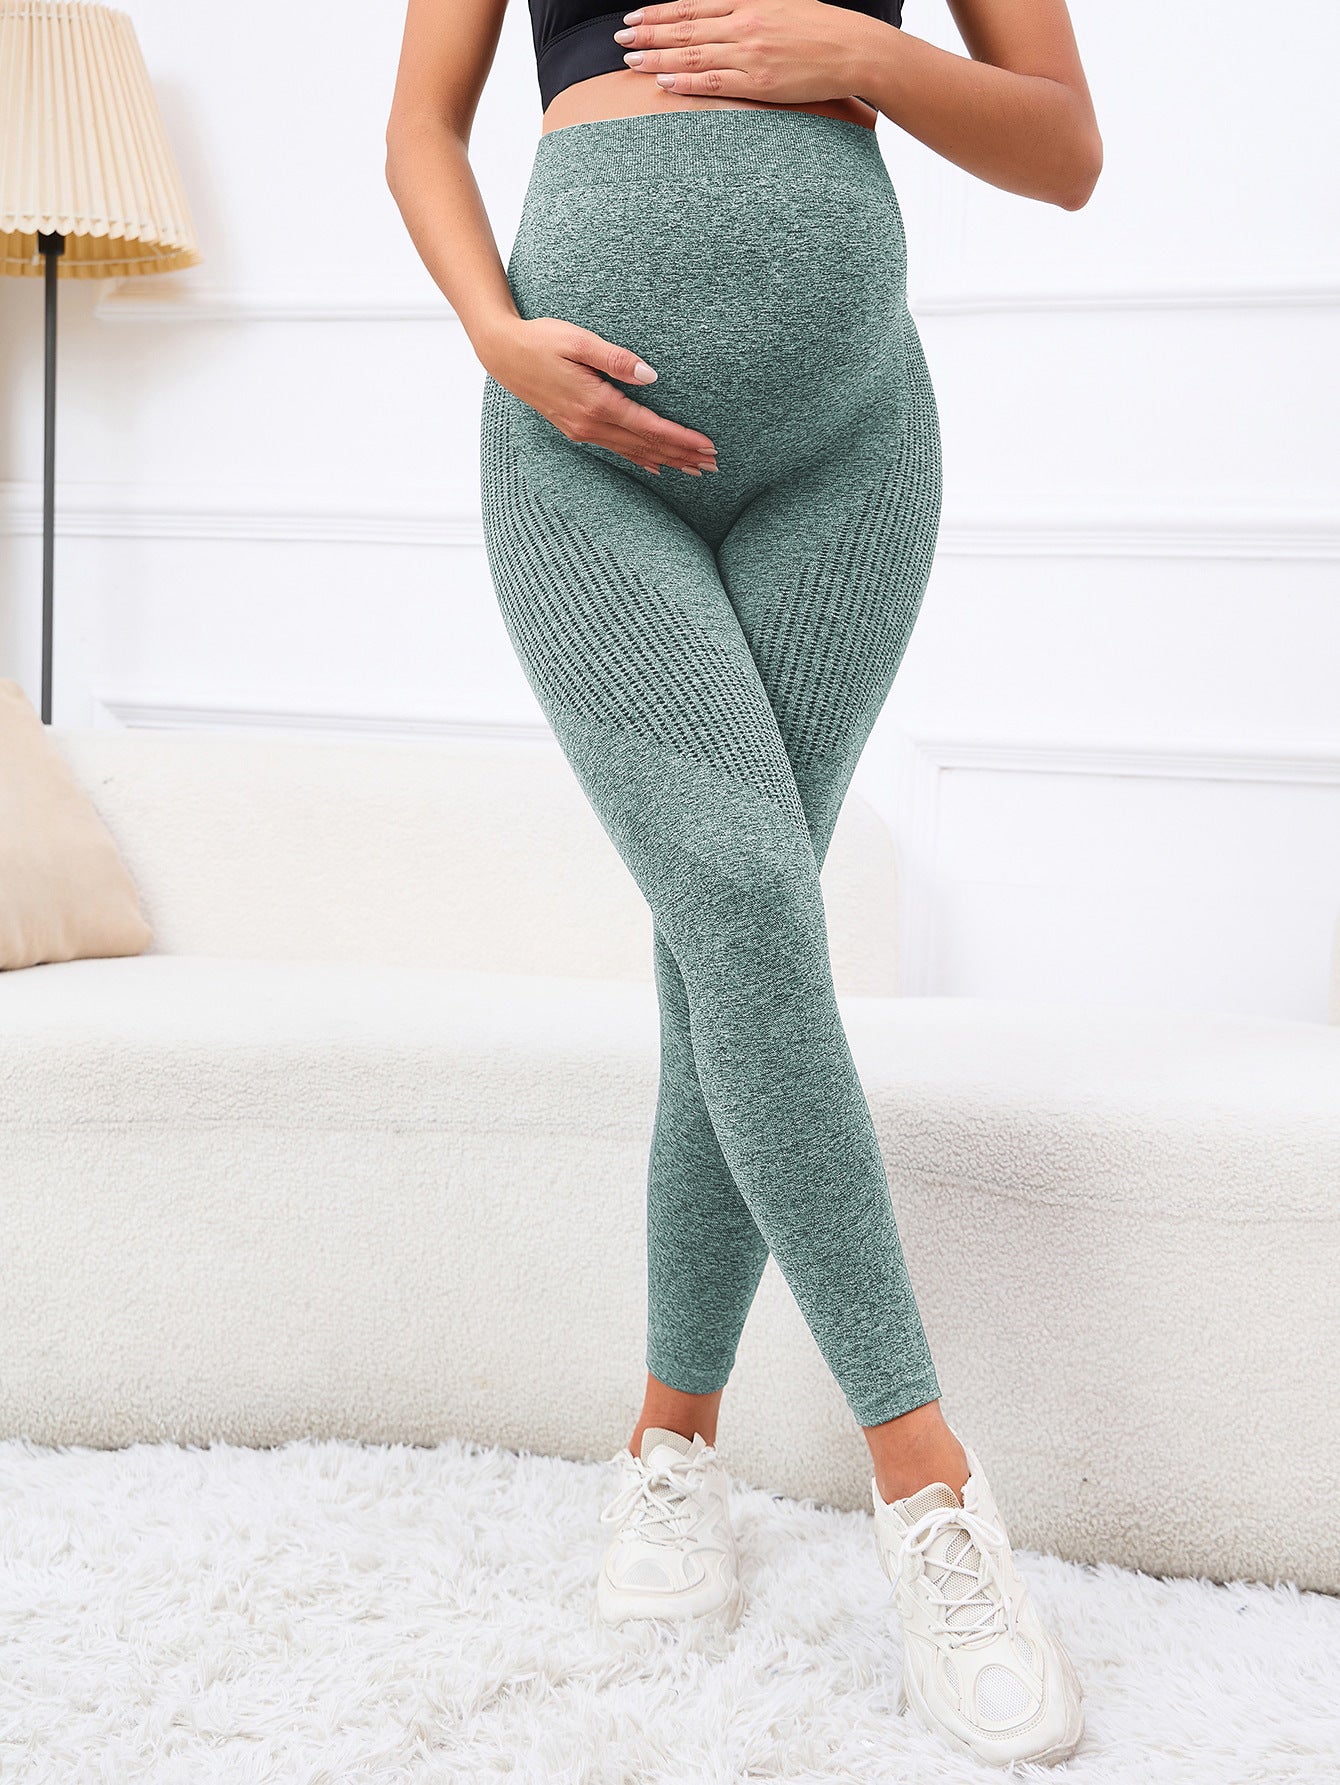 Three-dimensional Belly Support High Waist Pregnancy Yoga Pants